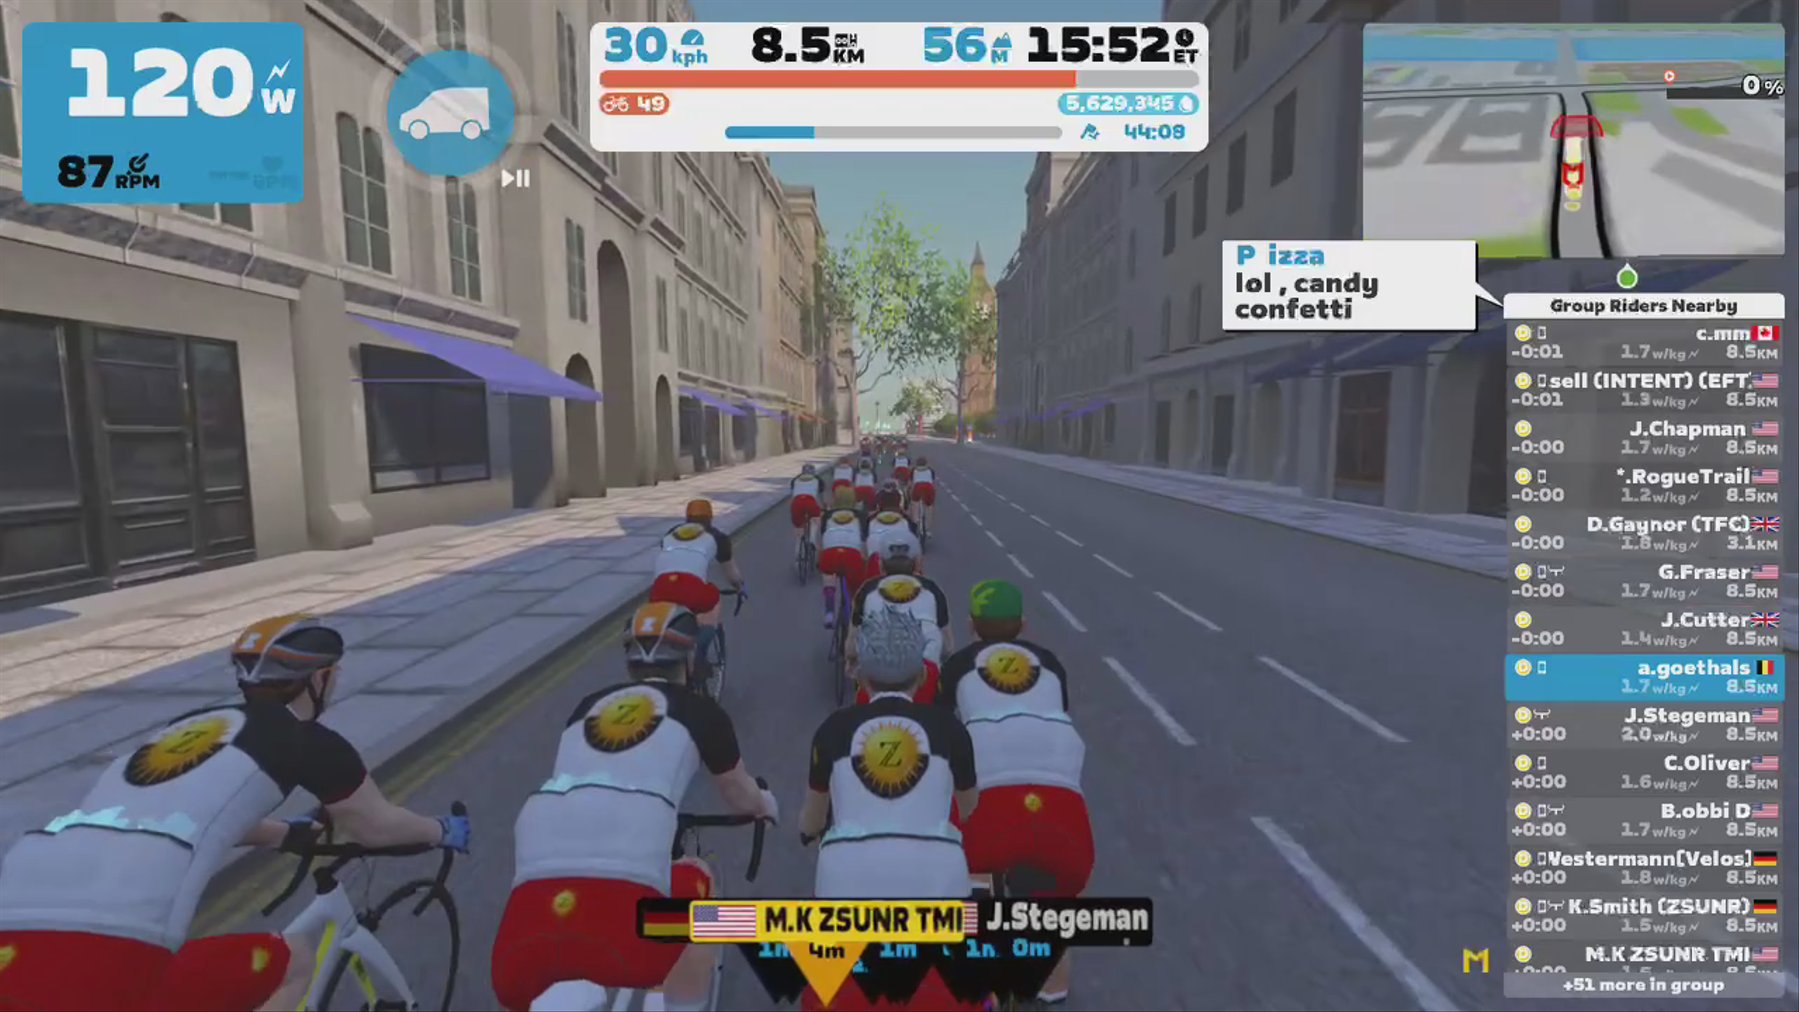 Zwift - Group Ride: ZSUN Saturday Social Ride (D) on Classique in London